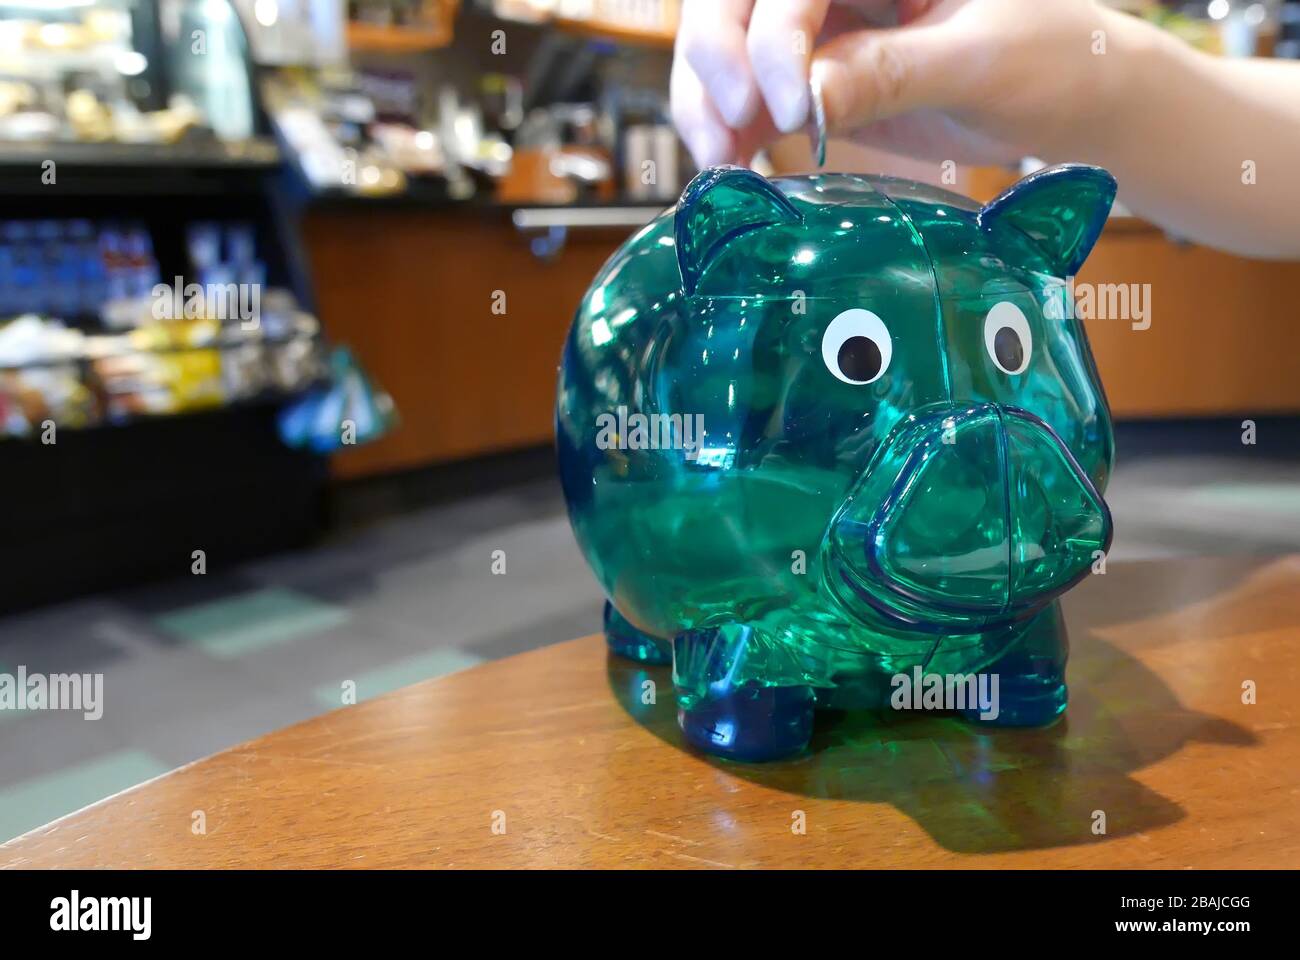 Hand placing coins on green piggy bank inside Starbucks store Stock Photo